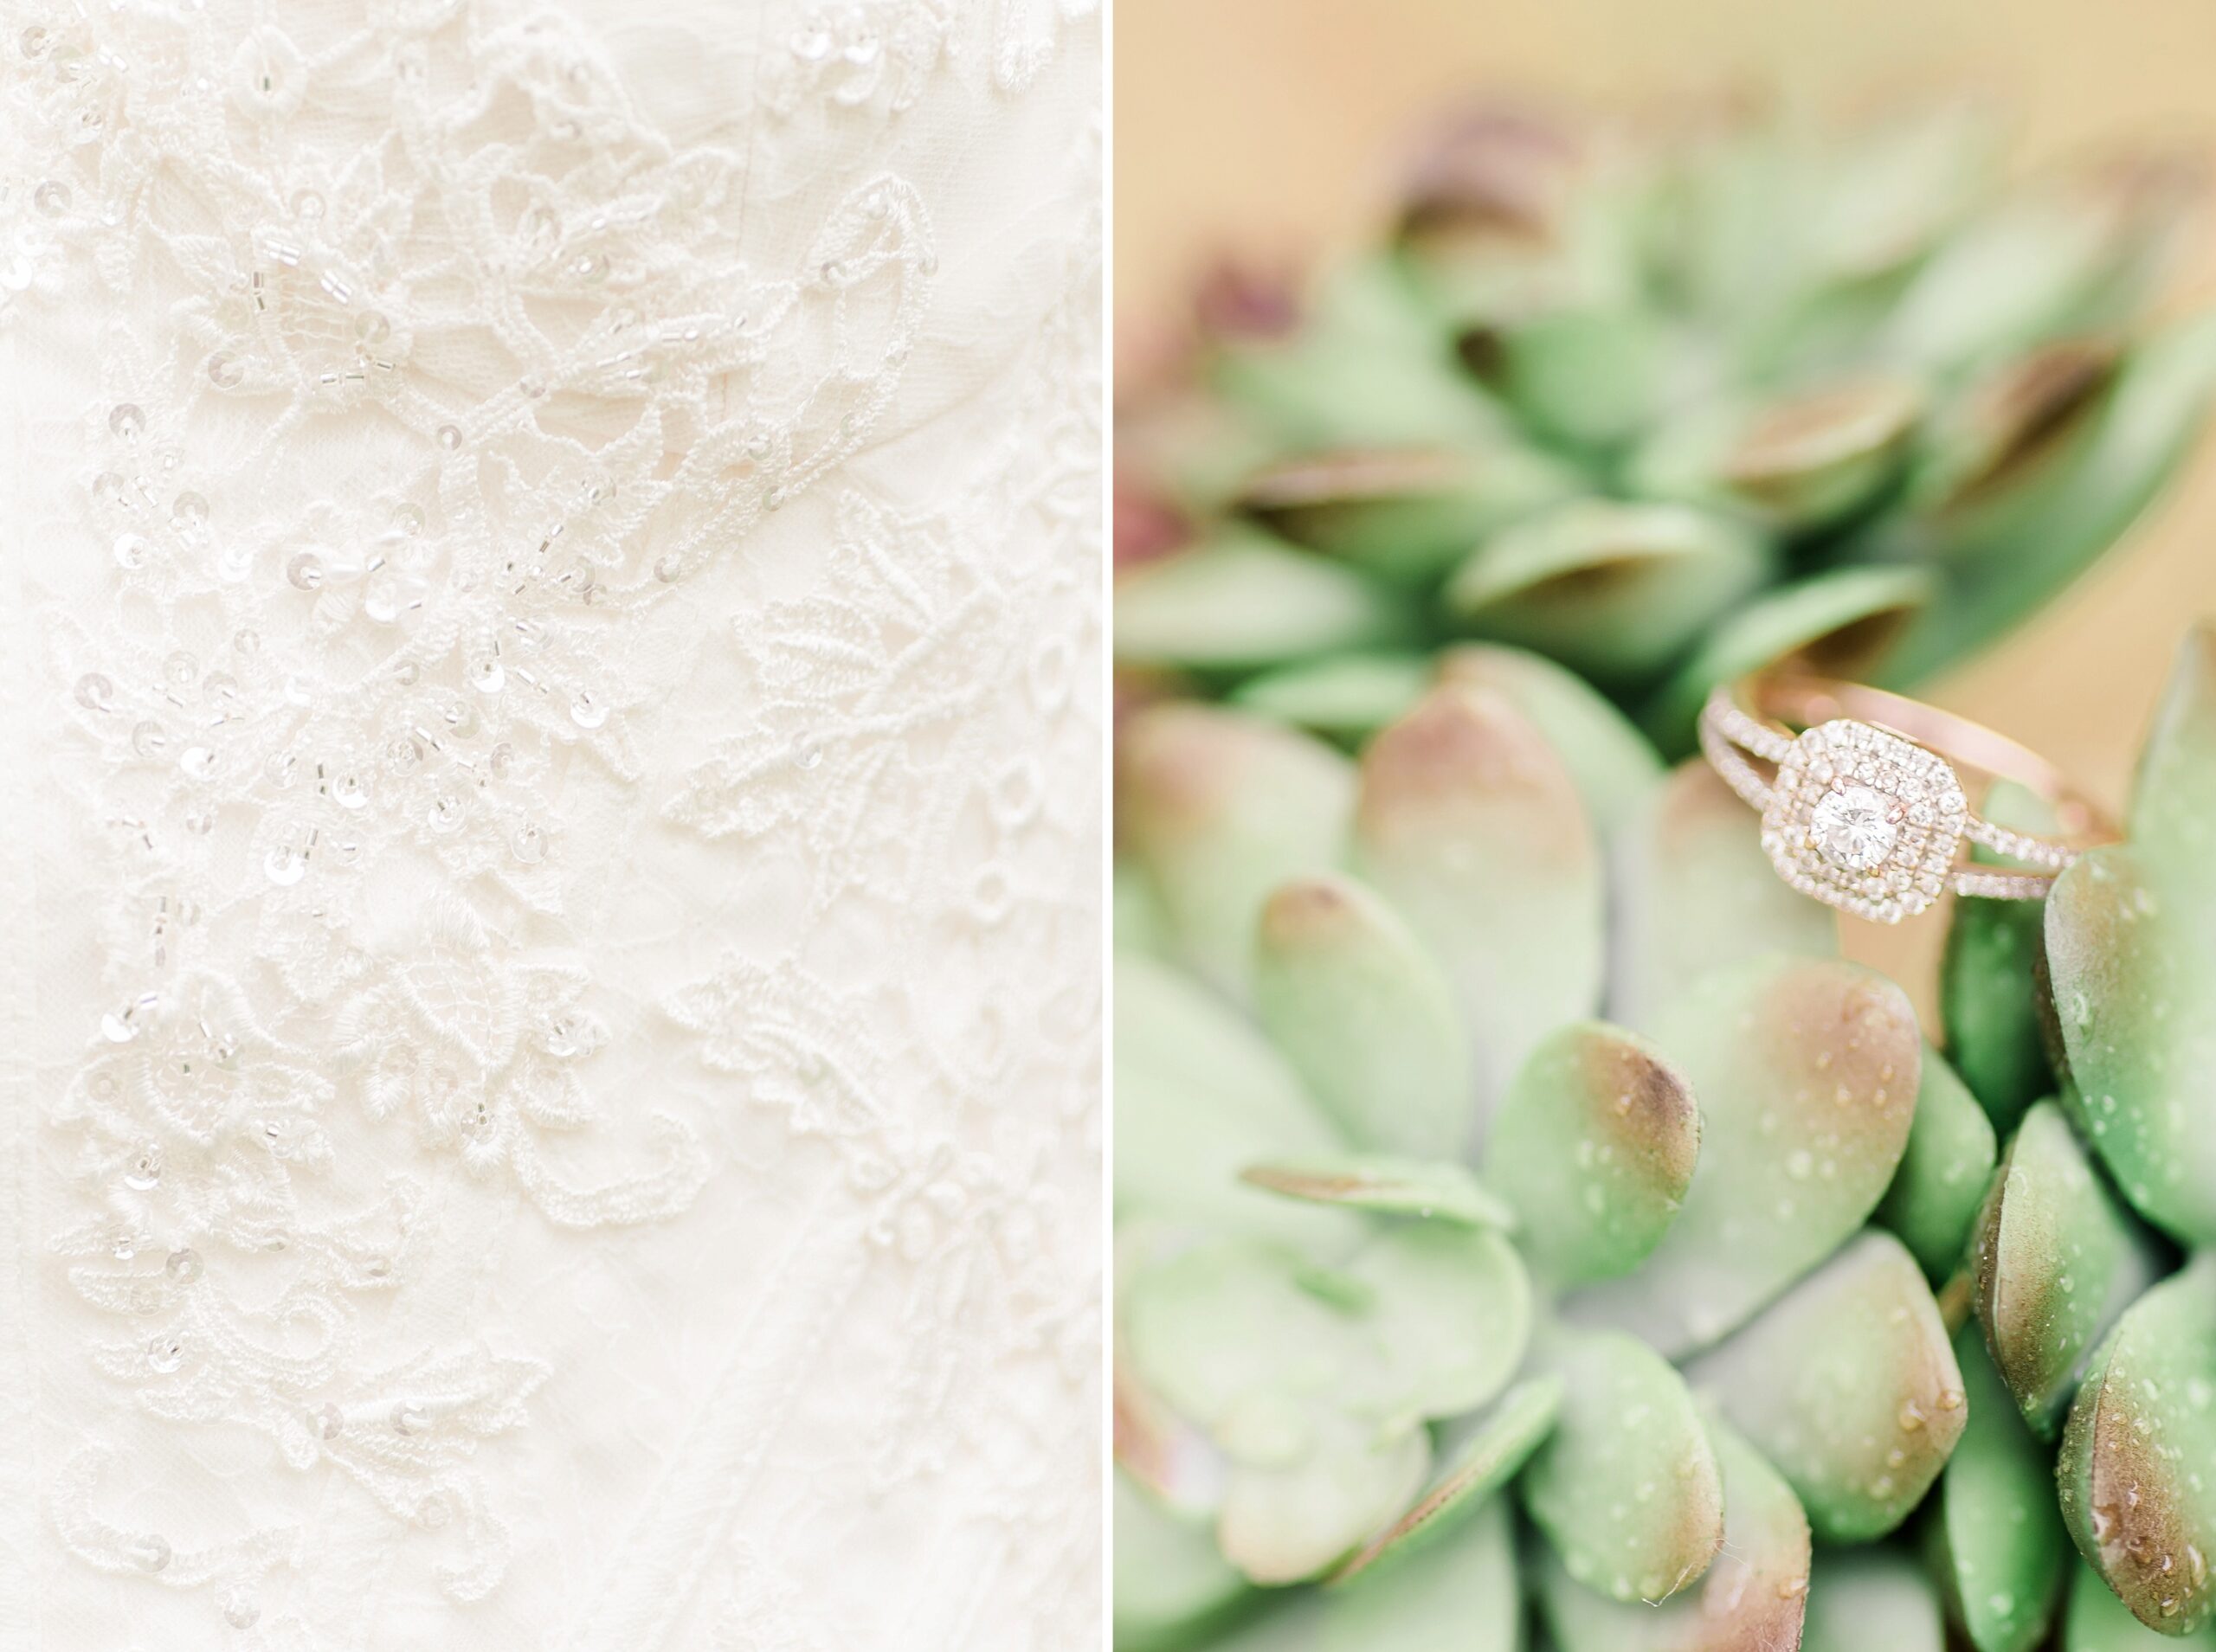 Indiana Wedding Rings spring succulents outdoors